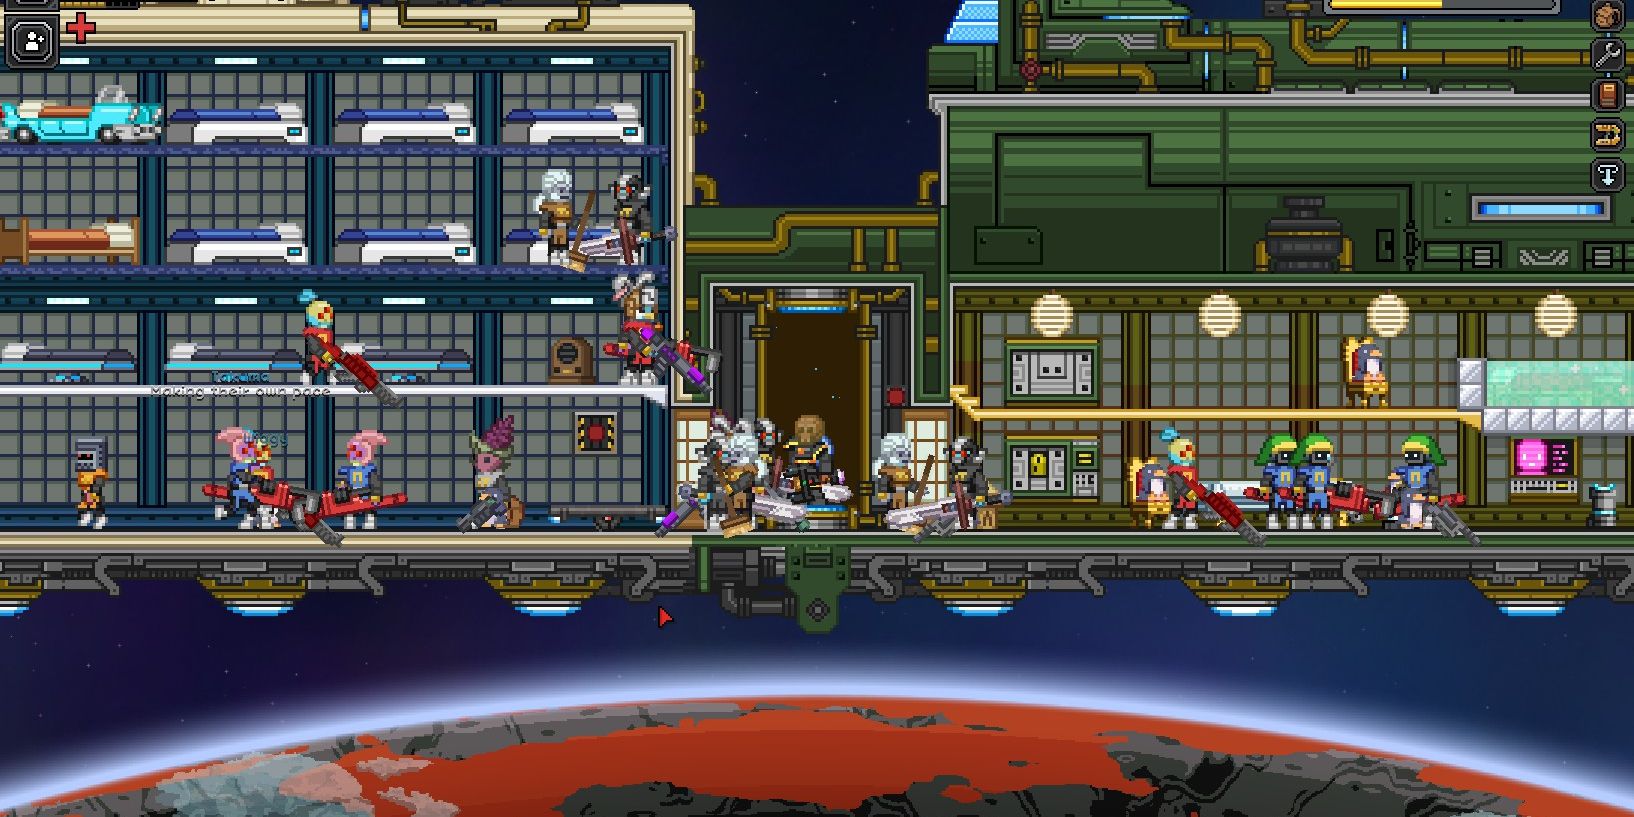 Starbound Multiplayer busy ship with various lodgings, rooms, hovering over planet